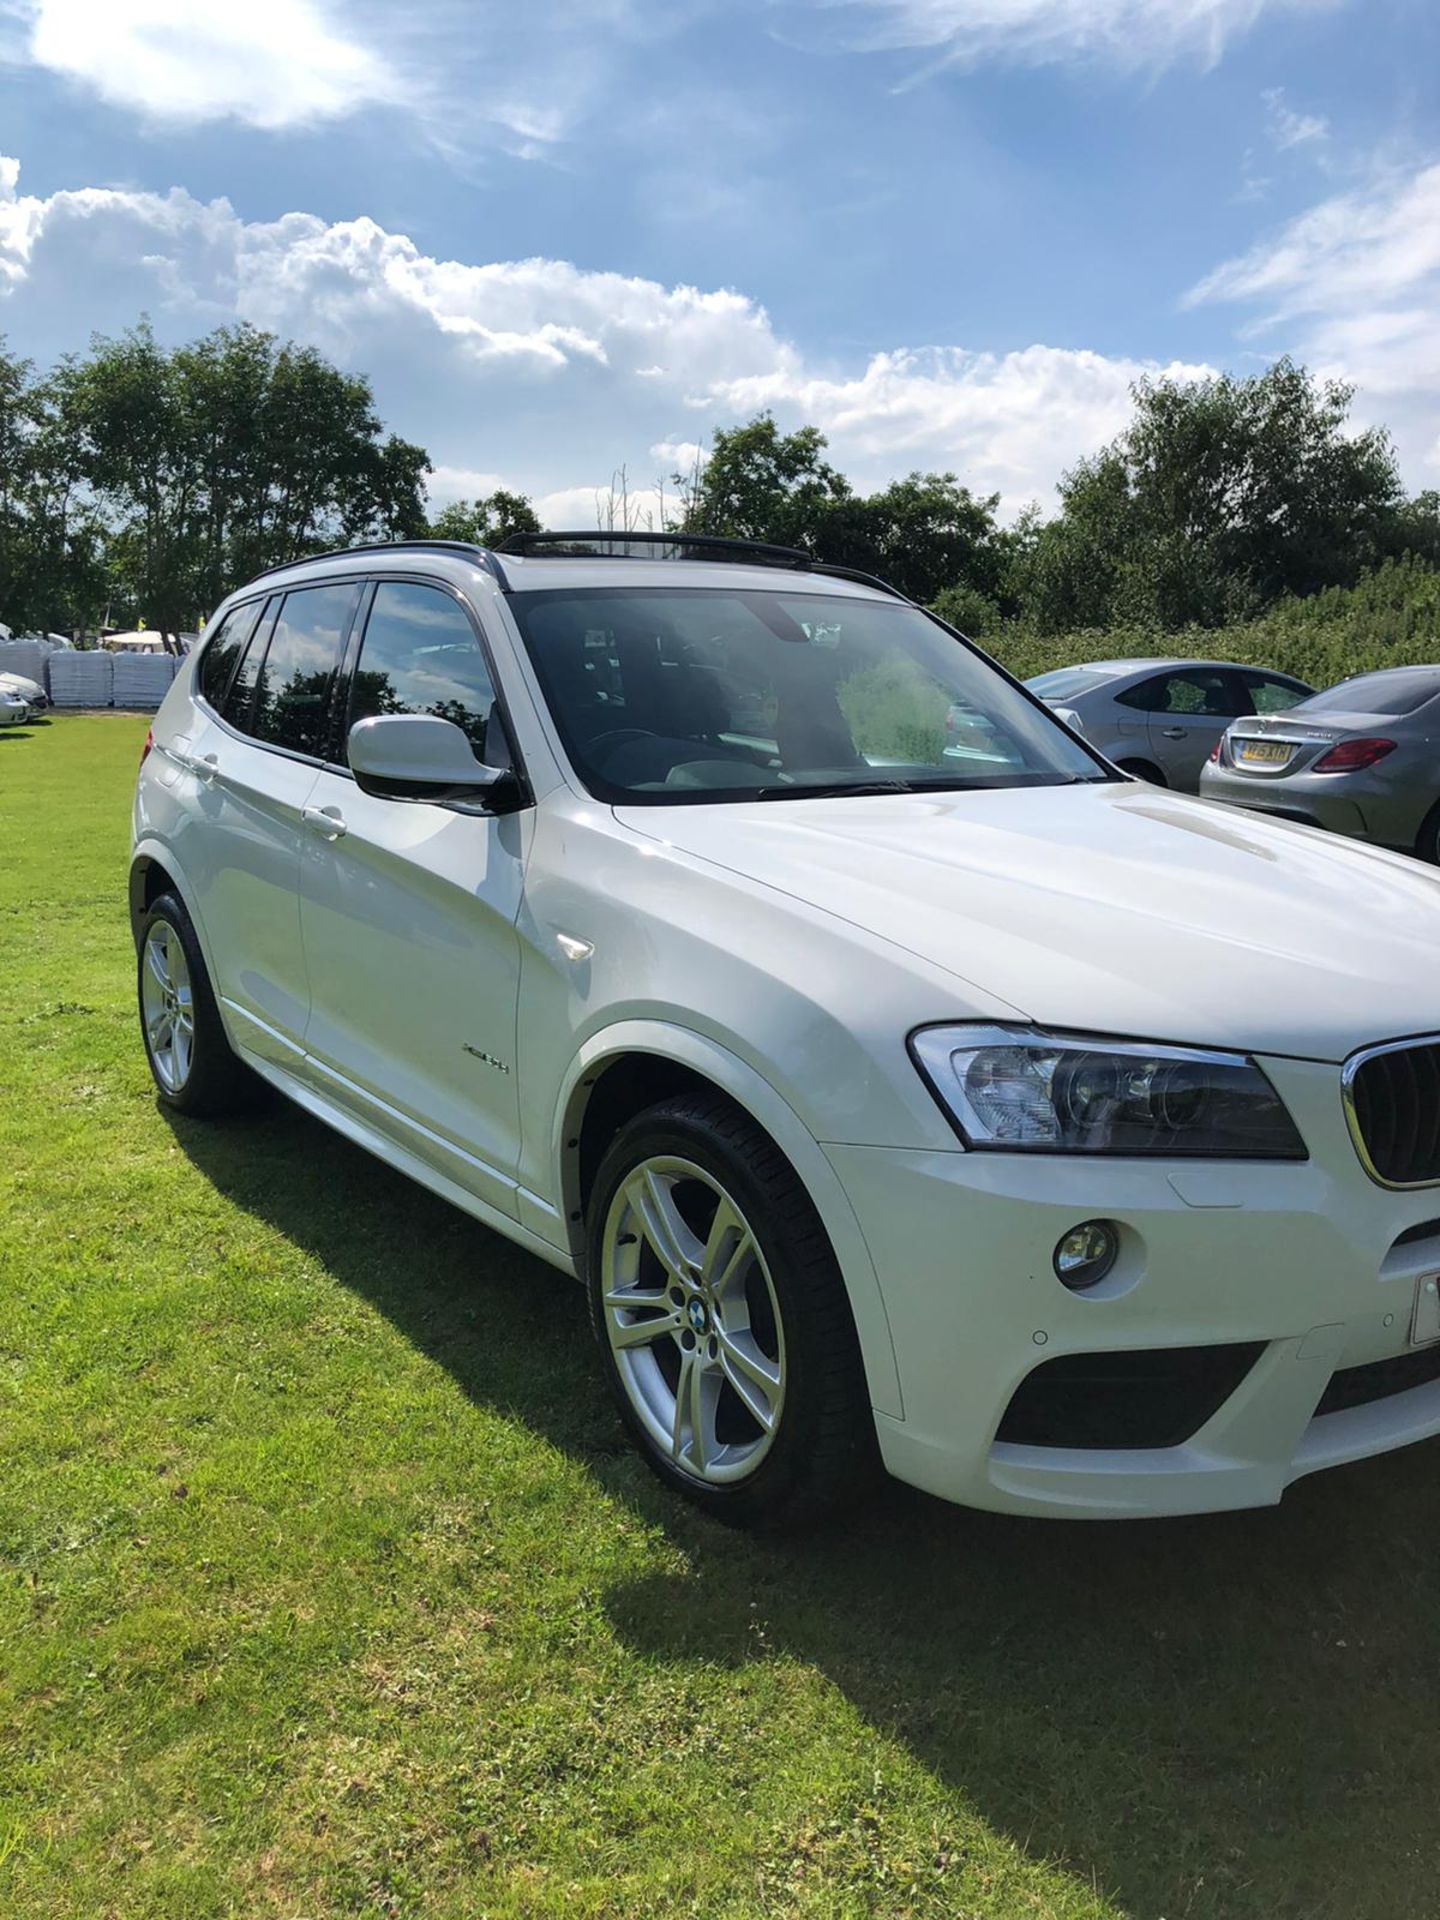 2012/62 REG BMW X3 XDRIVE 20D M SPORT 2.0 DIESEL AUTOMATIC 185 BHP, SHOWING 2 FORMER KEEPERS